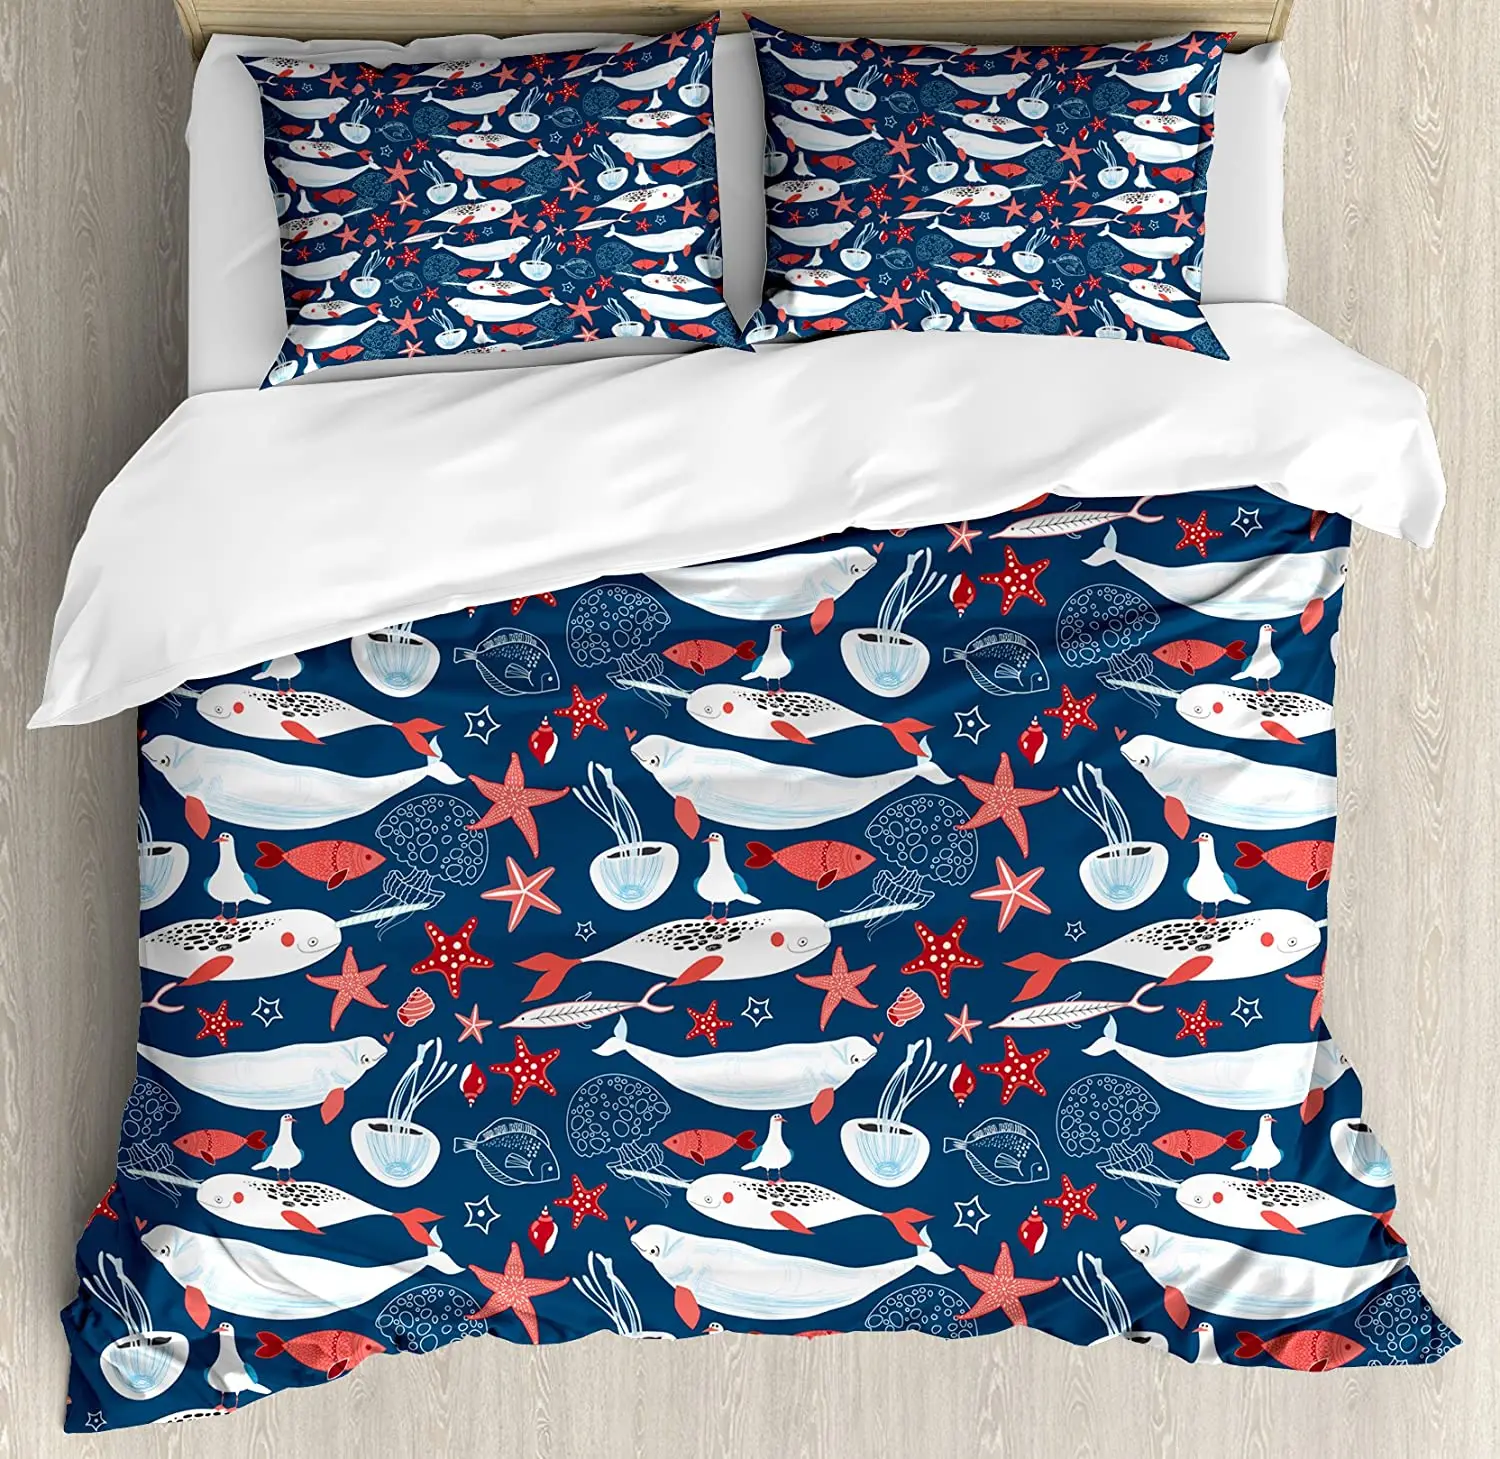 

Narwhal Bedding Set For Bedroom Bed Home Arctic Ocean Fauna with School of Fish Narwhal a Duvet Cover Quilt Cover And Pillowcase